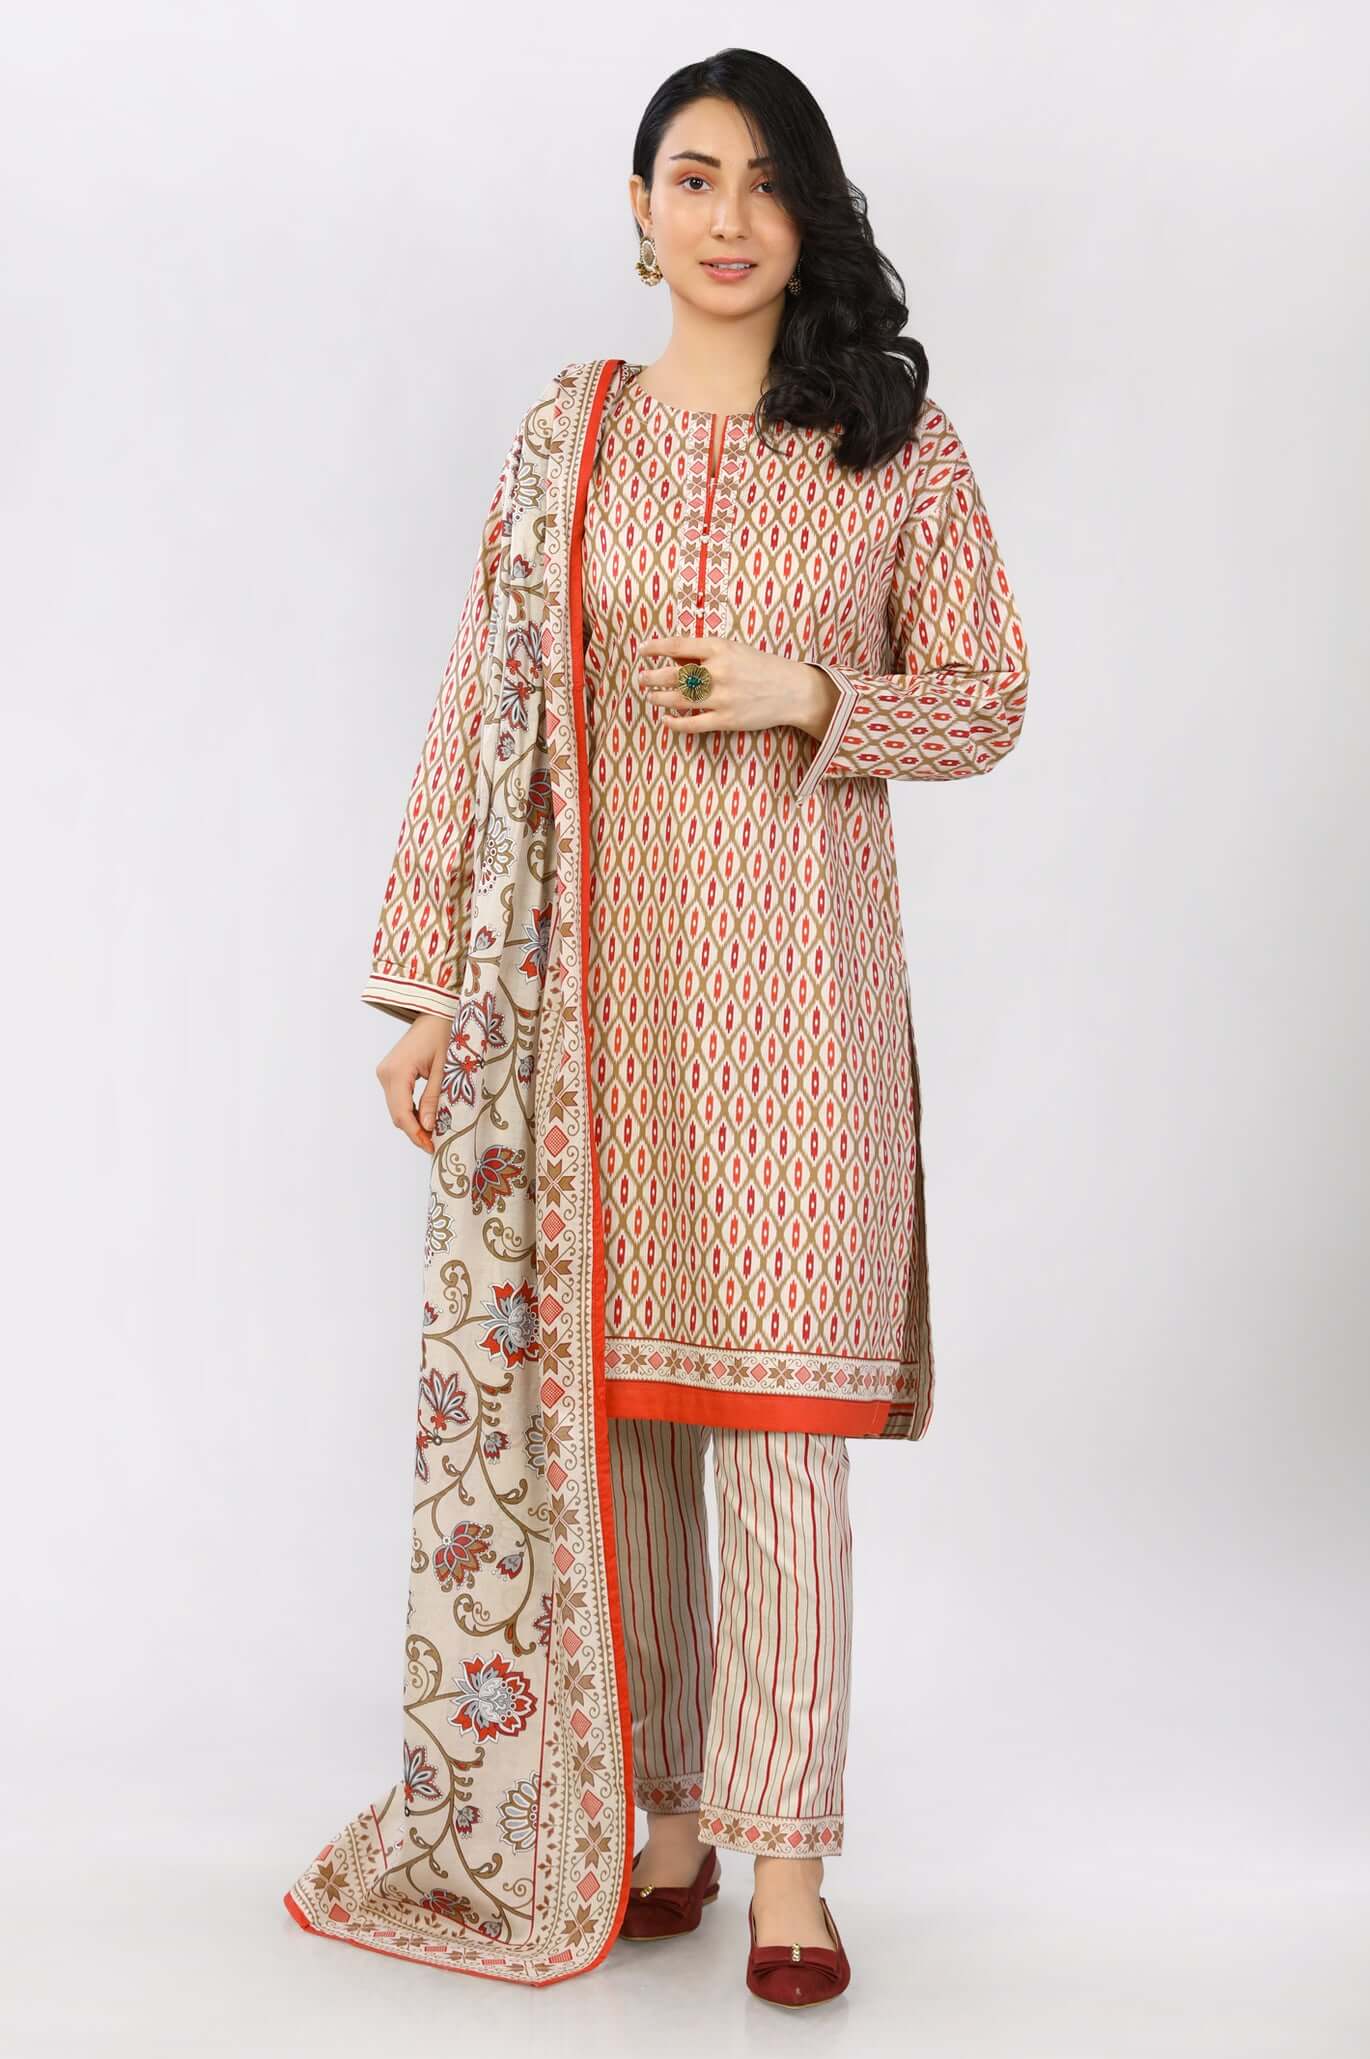 3PC Printed Suit From Diners